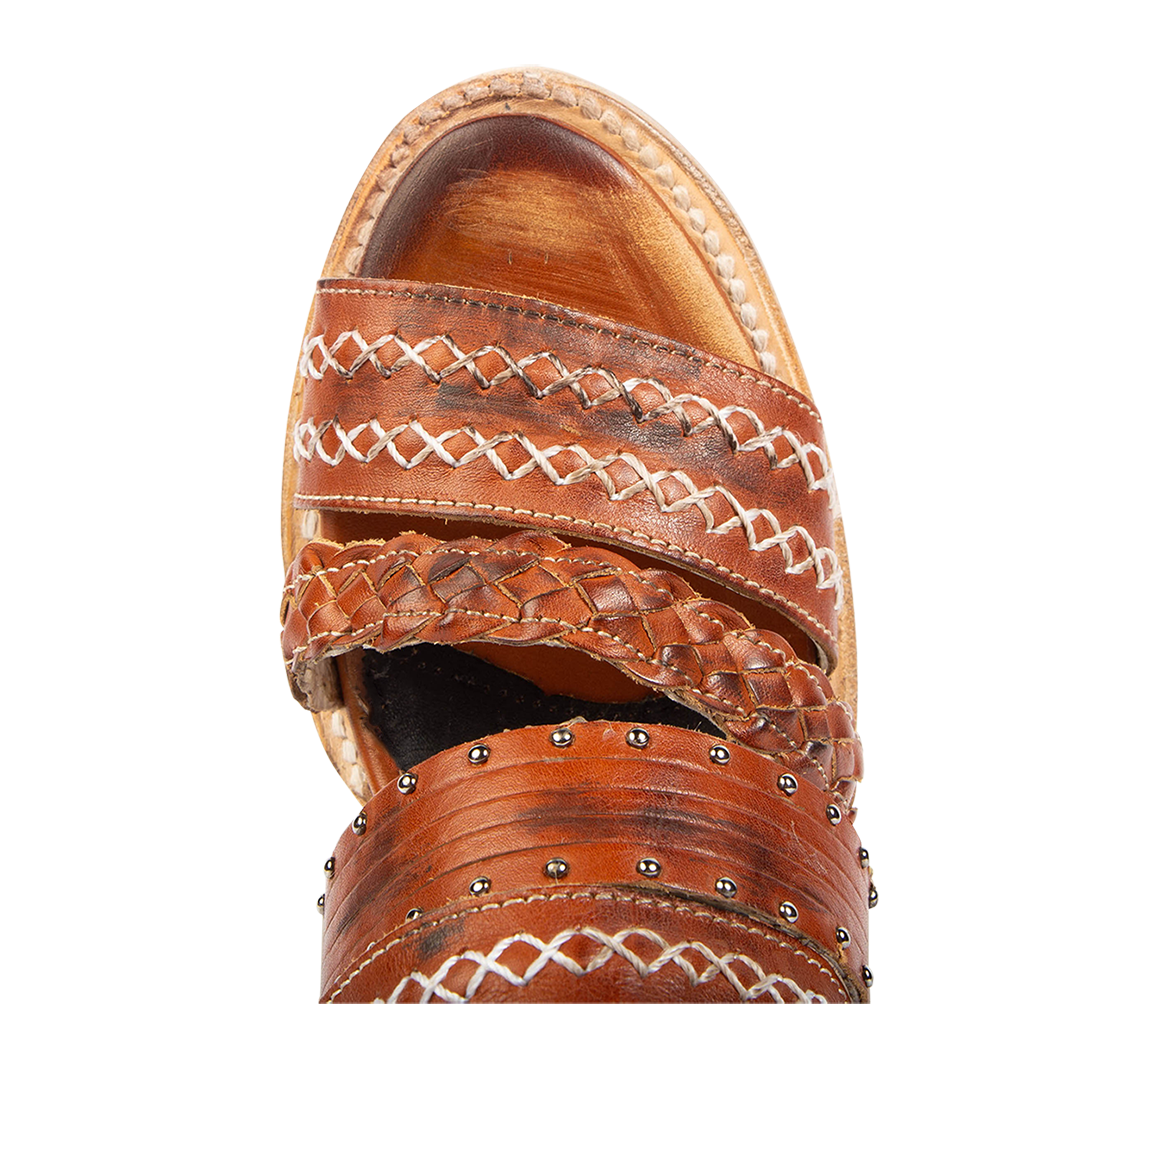 Top view showing braided and stitch detailed straps on FREEBIRD women's Albuquerque whiskey open-toe slip-on sandal